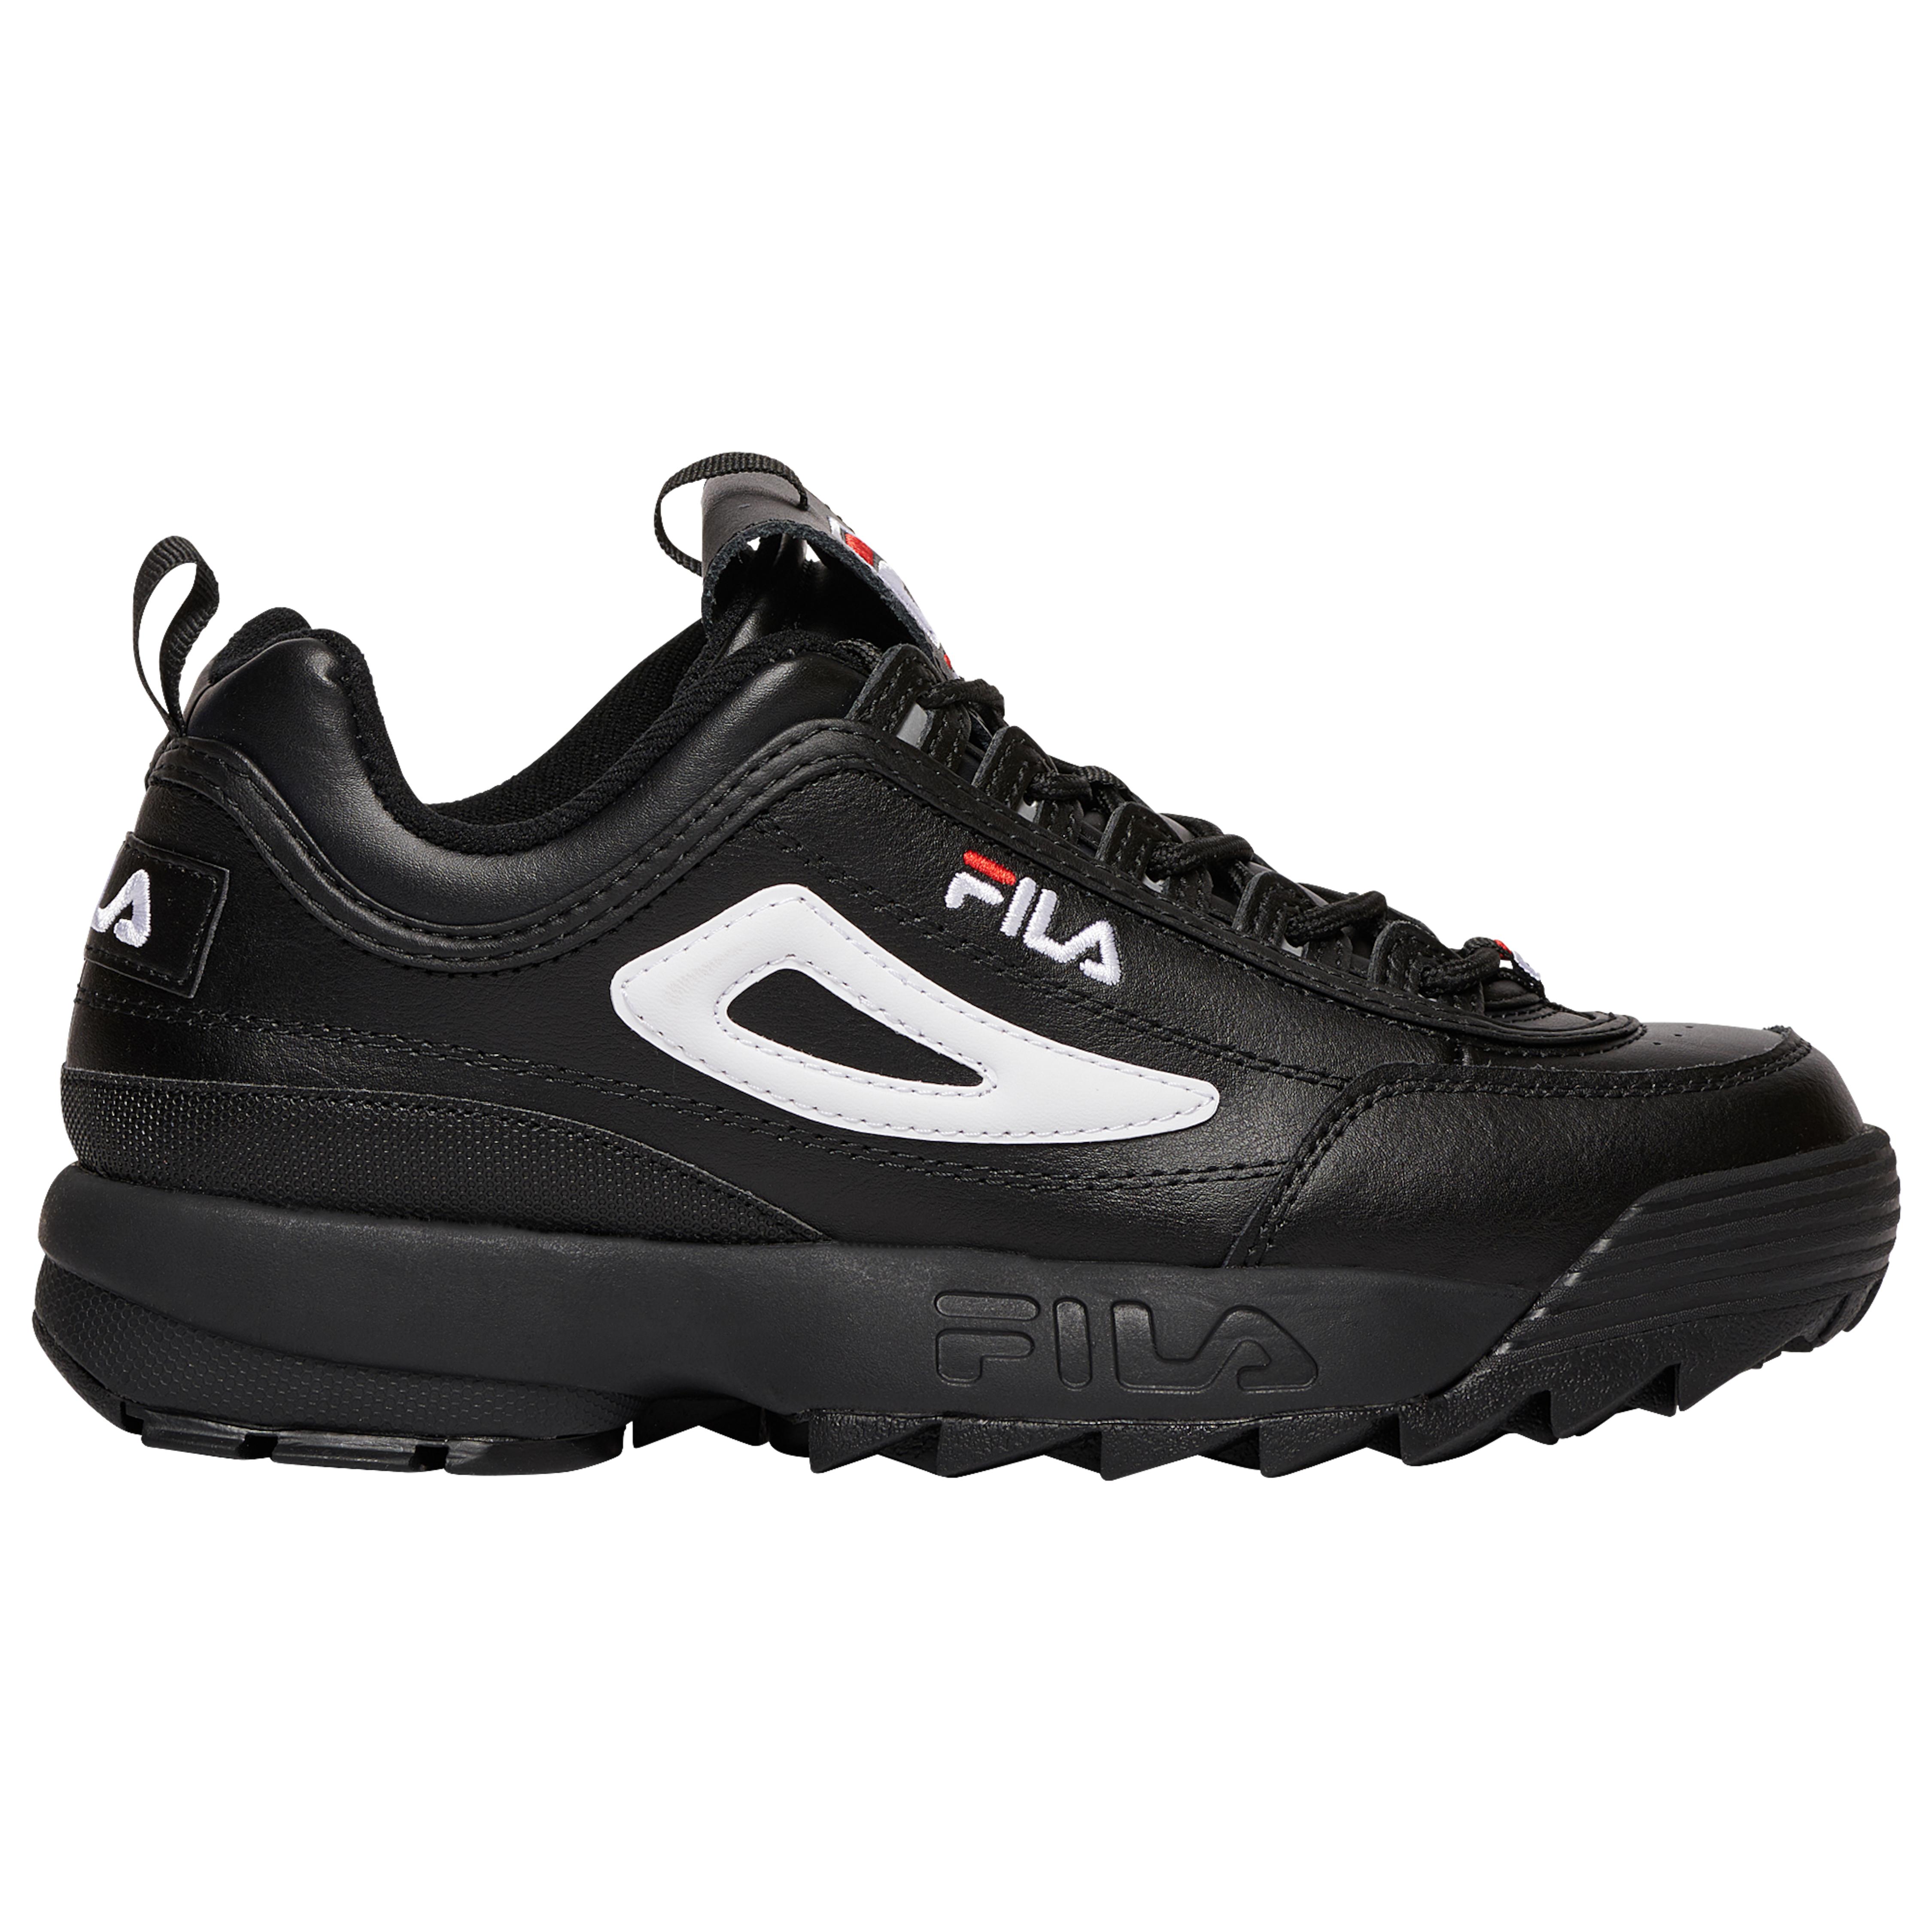 Fila Leather Disruptor Shoes in Black/White/Red (Black) for Men - Lyst